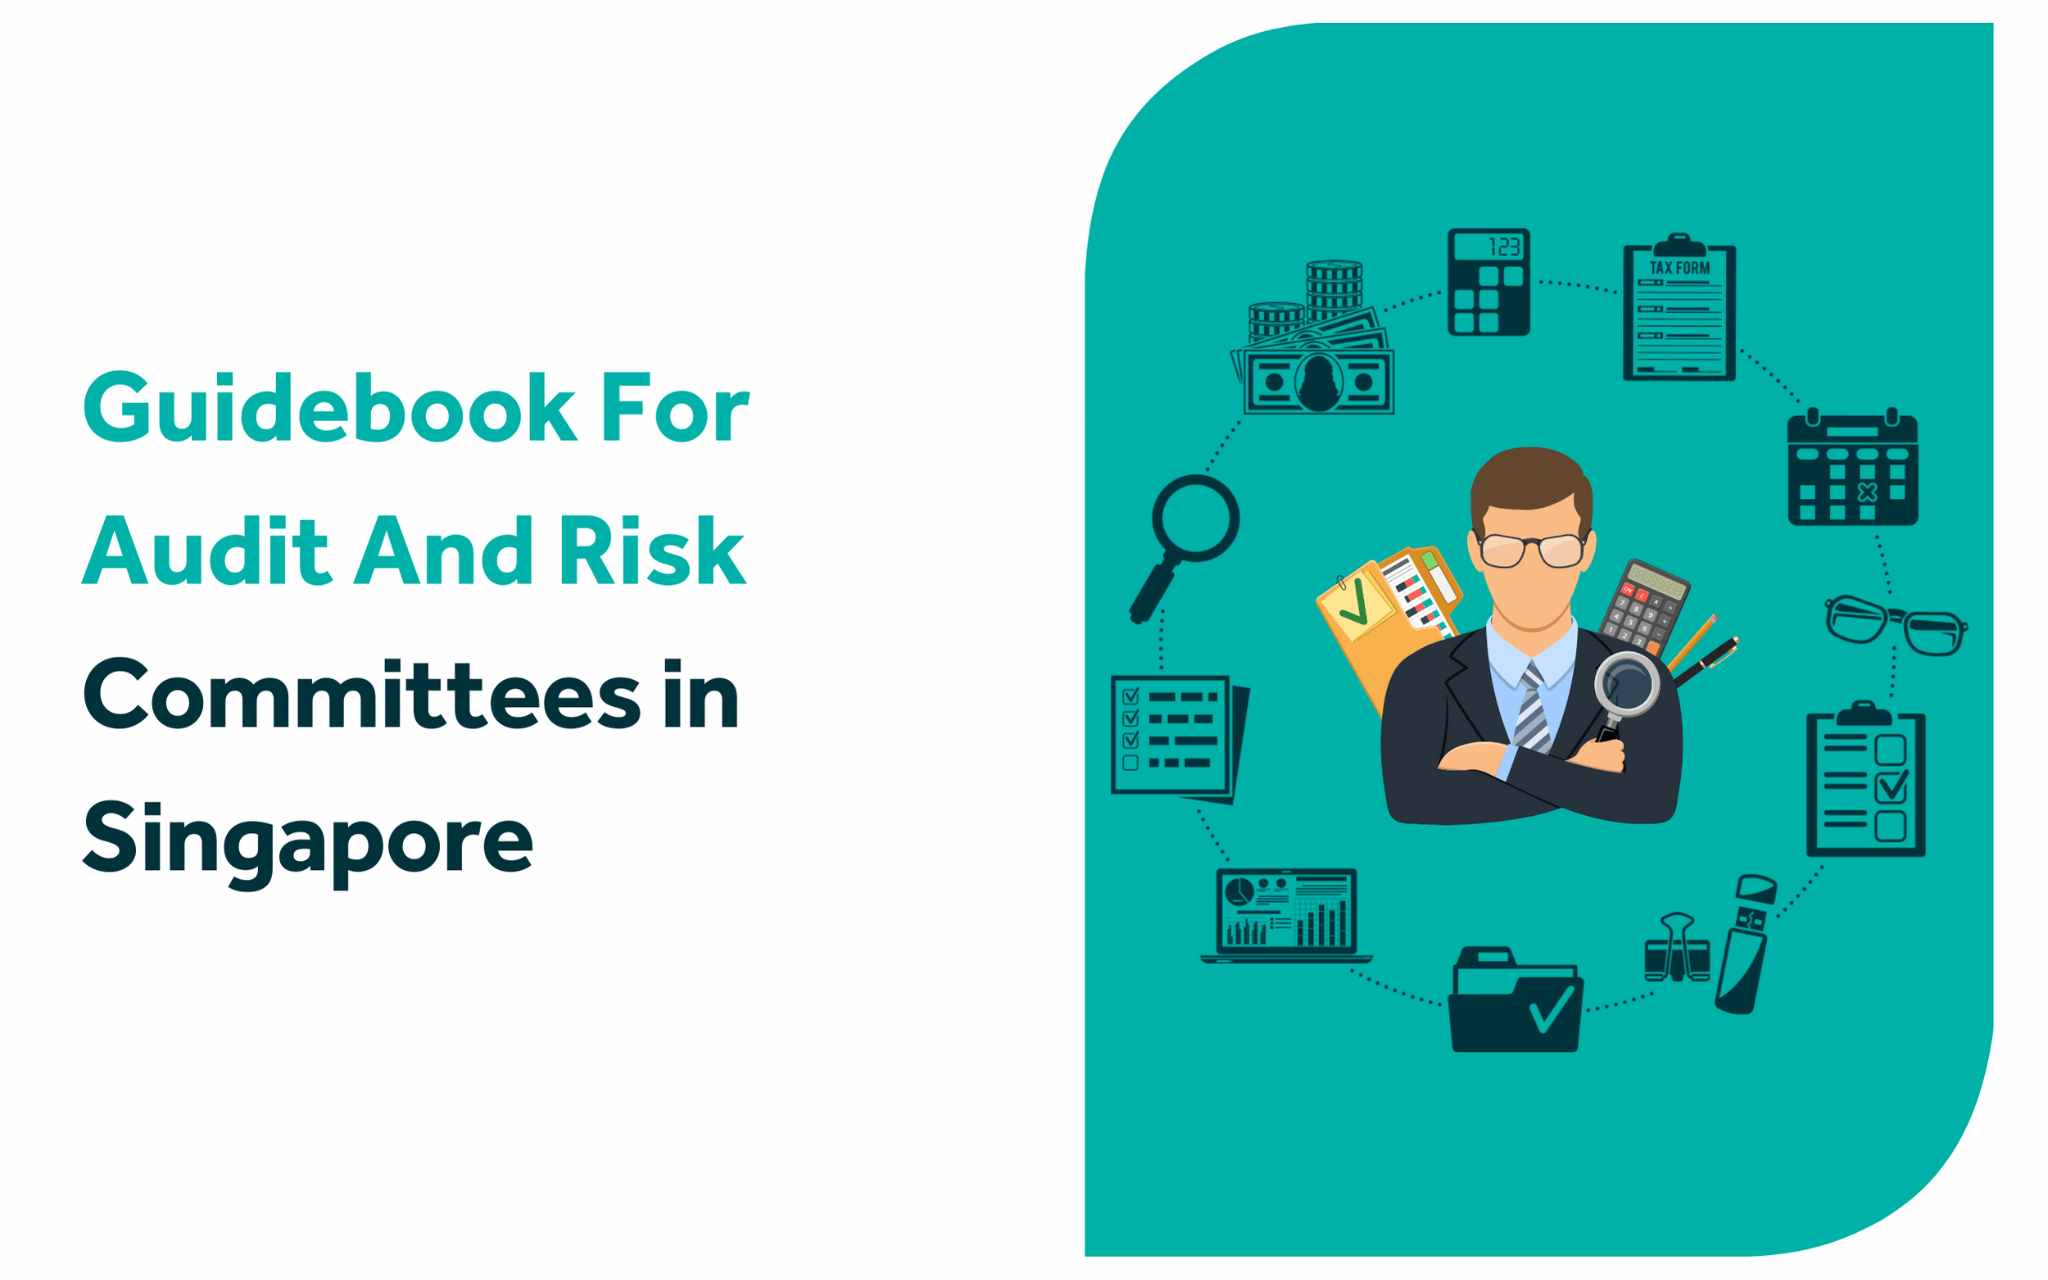 Guidebook for Audit and Risk Committees in Singapore